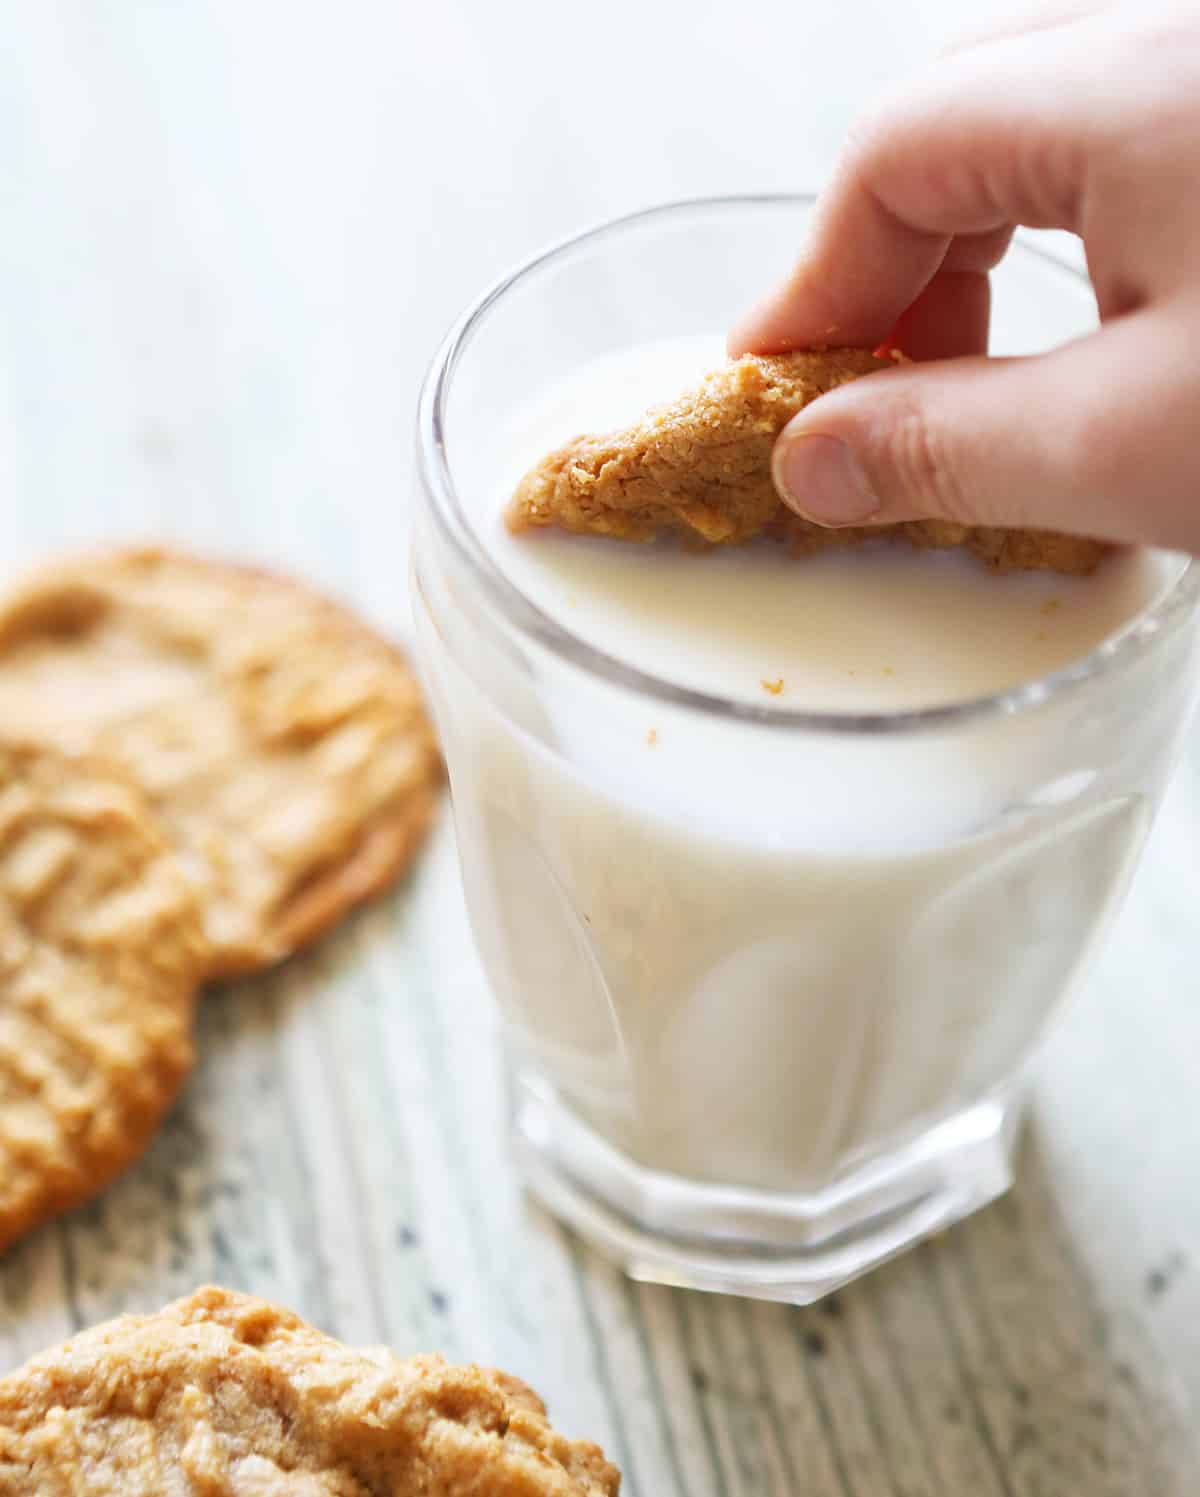 hand dunking a peanut butter cookie into a glass of milk